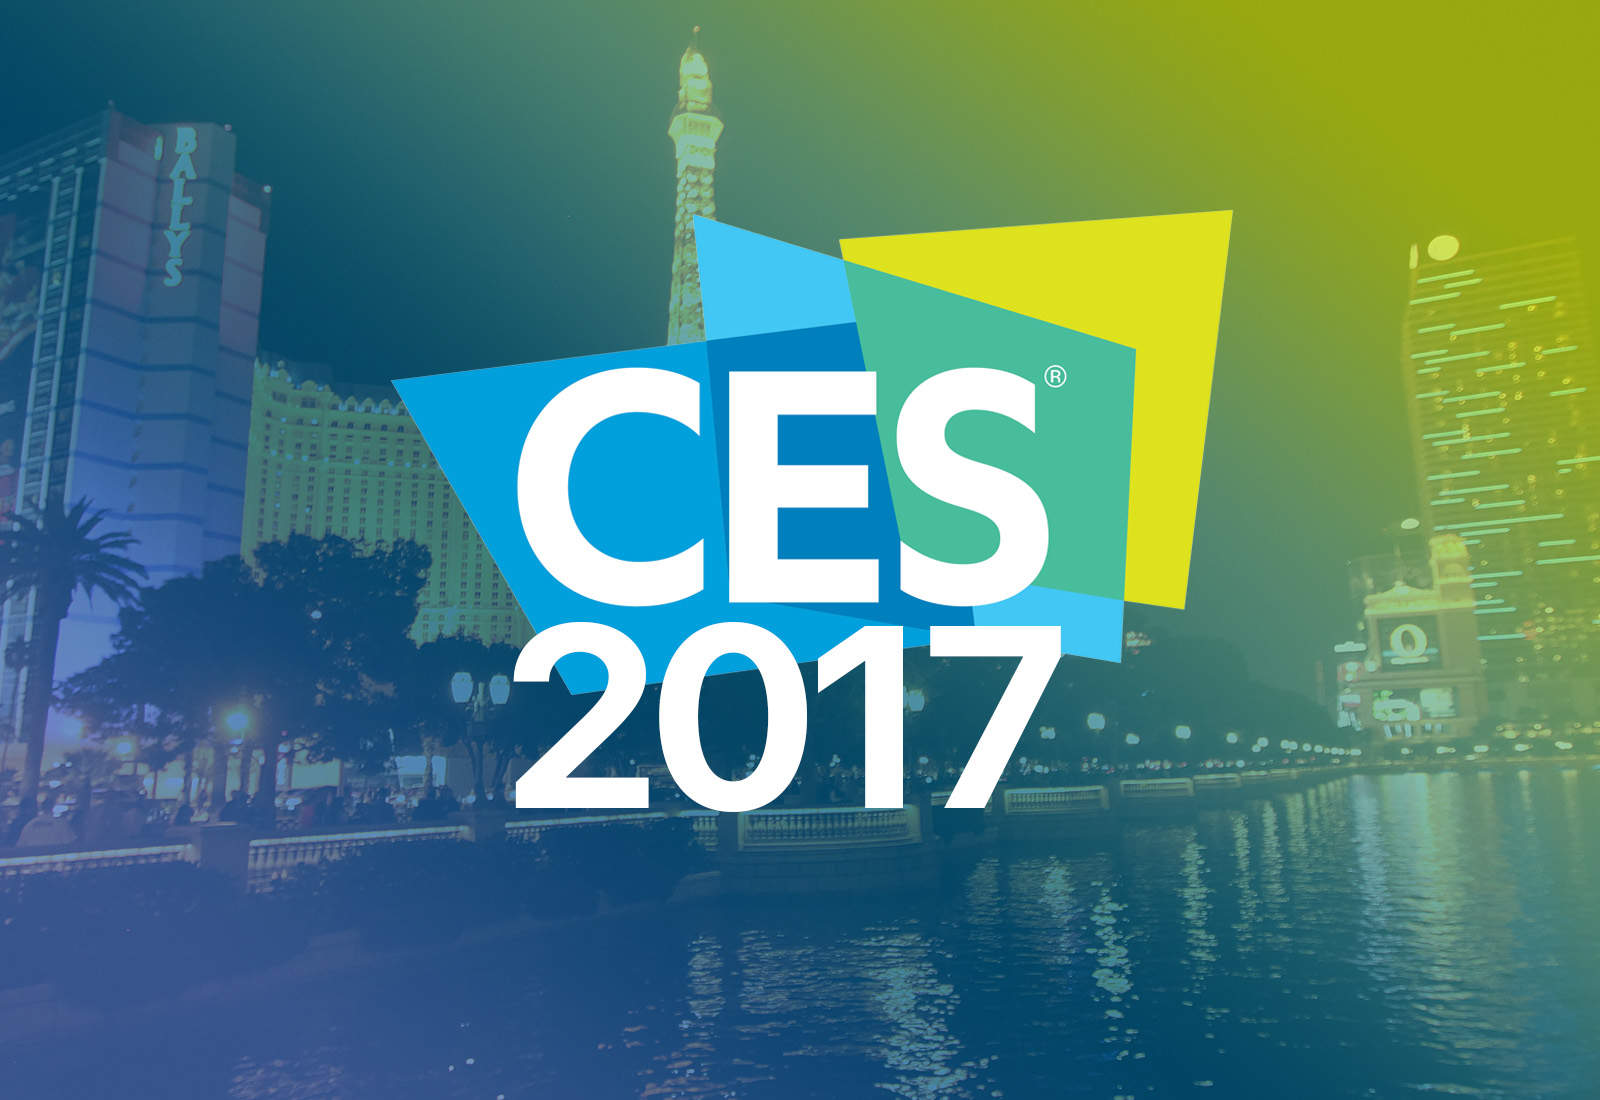 Each year at CES, tech's biggest players show off their latest, greatest gear. (Except for Apple, of course.)